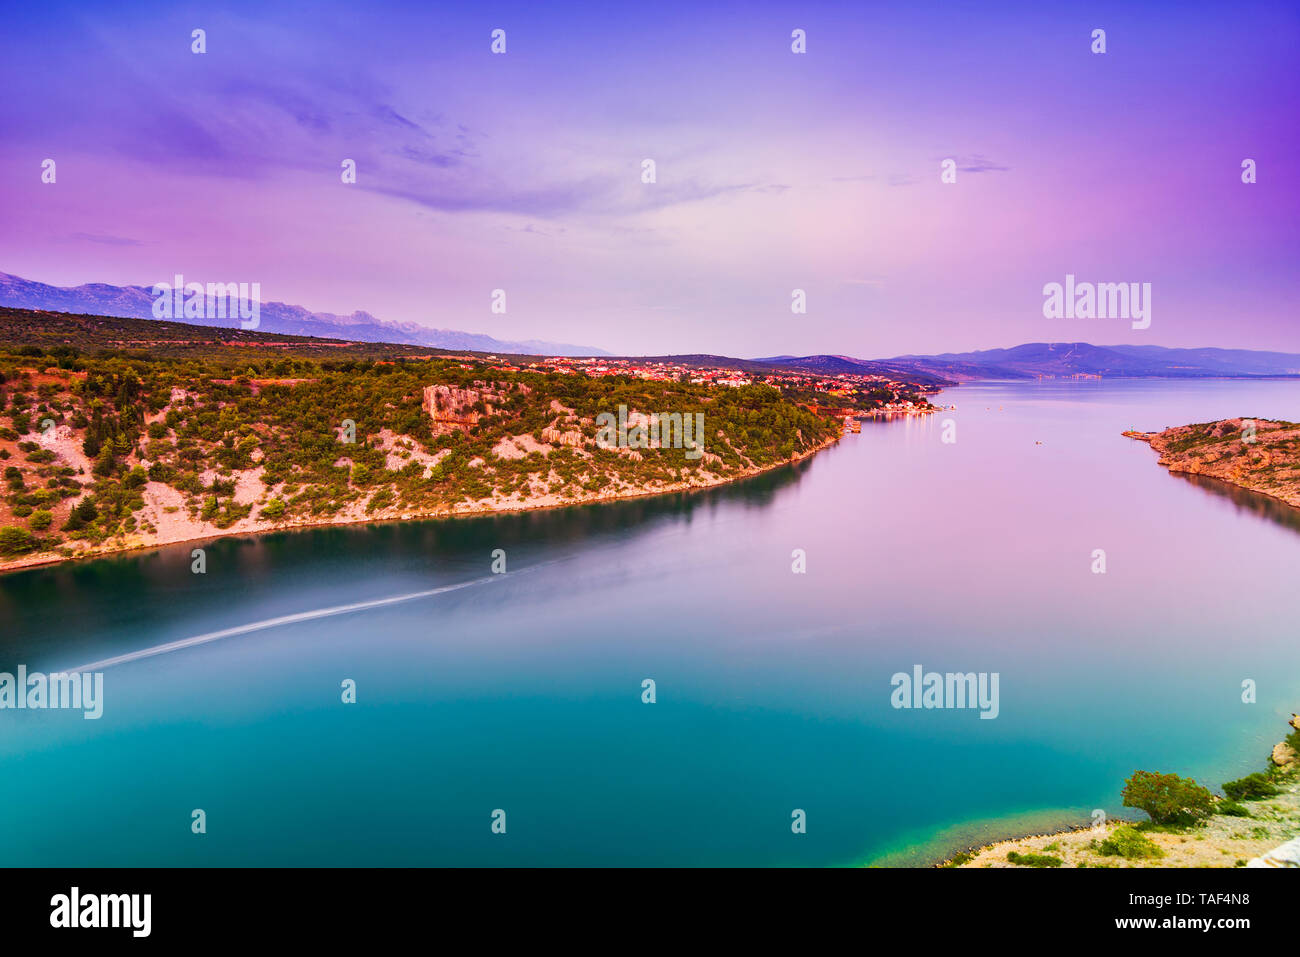 Colorful wide angle scenic view over Novigrad Sea and Maslenica town from Maslenica bridge in Dalmatia, Croatia. Wide angle and long exposure image. Stock Photo